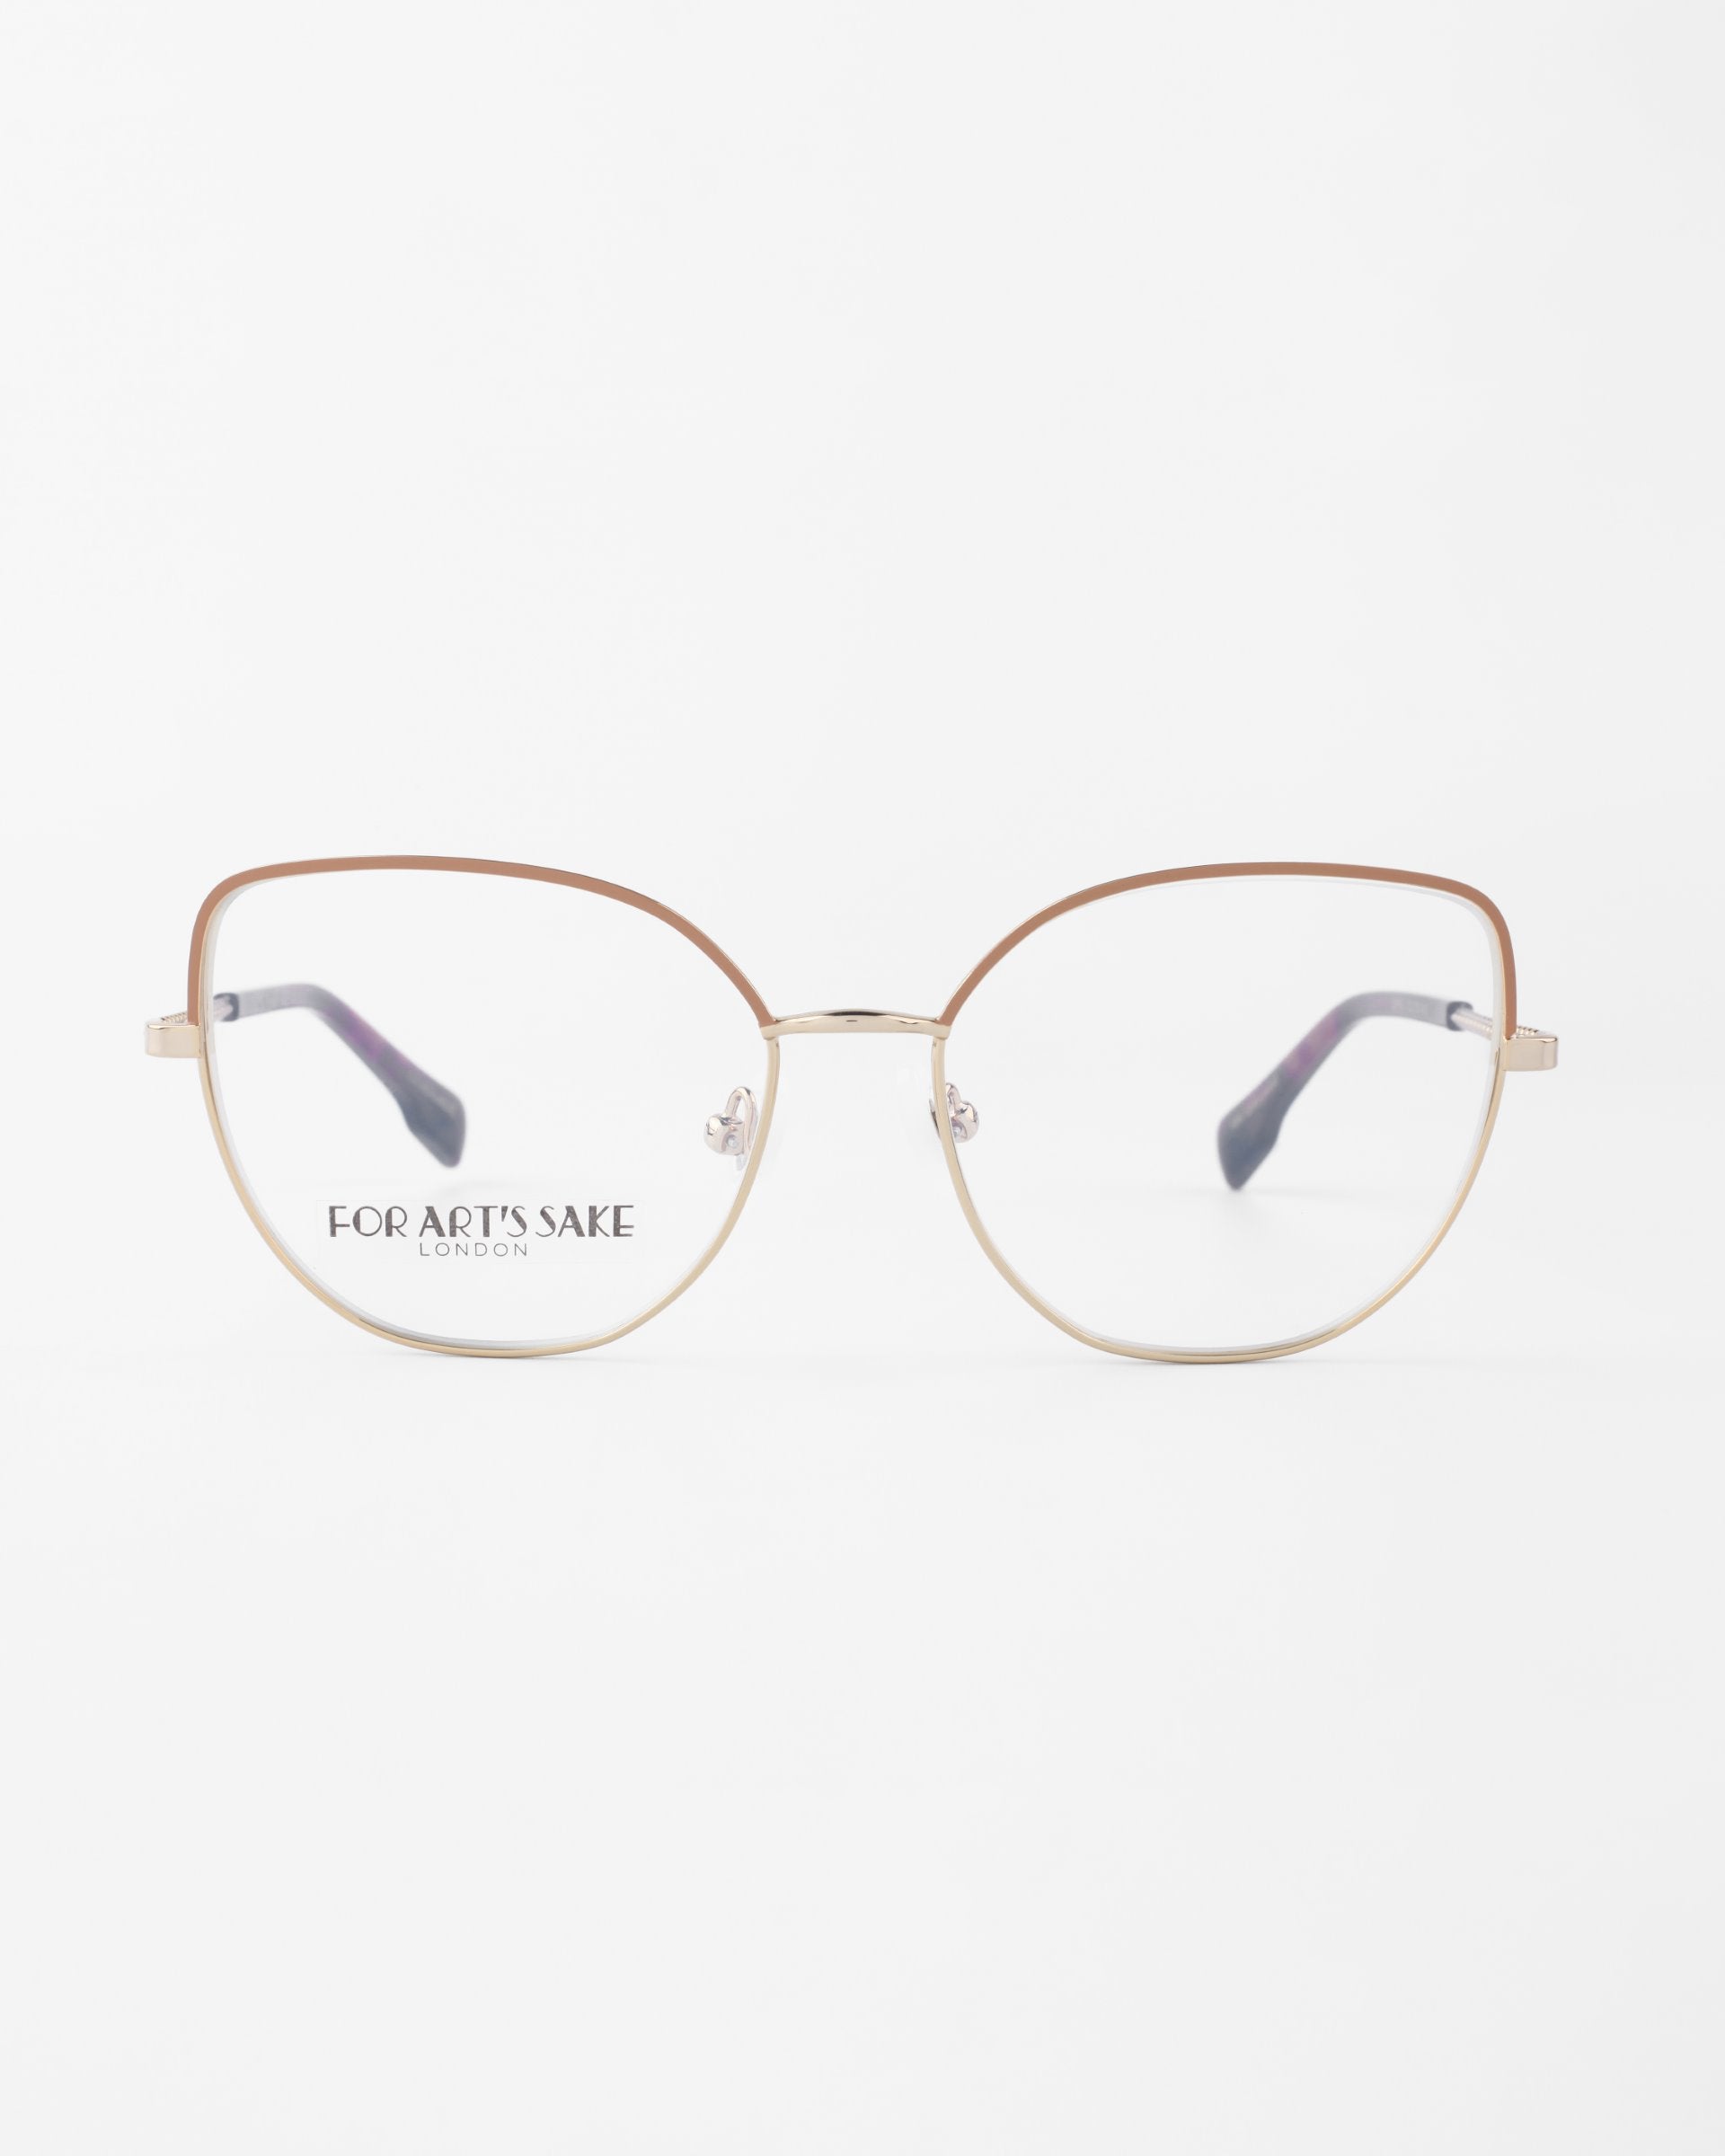 A pair of stylish, round eyeglasses with slender gold frames and brown-tinted upper rims. The clear lenses, featuring a slight cat-eye silhouette, come with a blue light filter. &quot;For Art&#39;s Sake® Ophelia&quot; is printed on the inside of the left lens. The background is plain white.